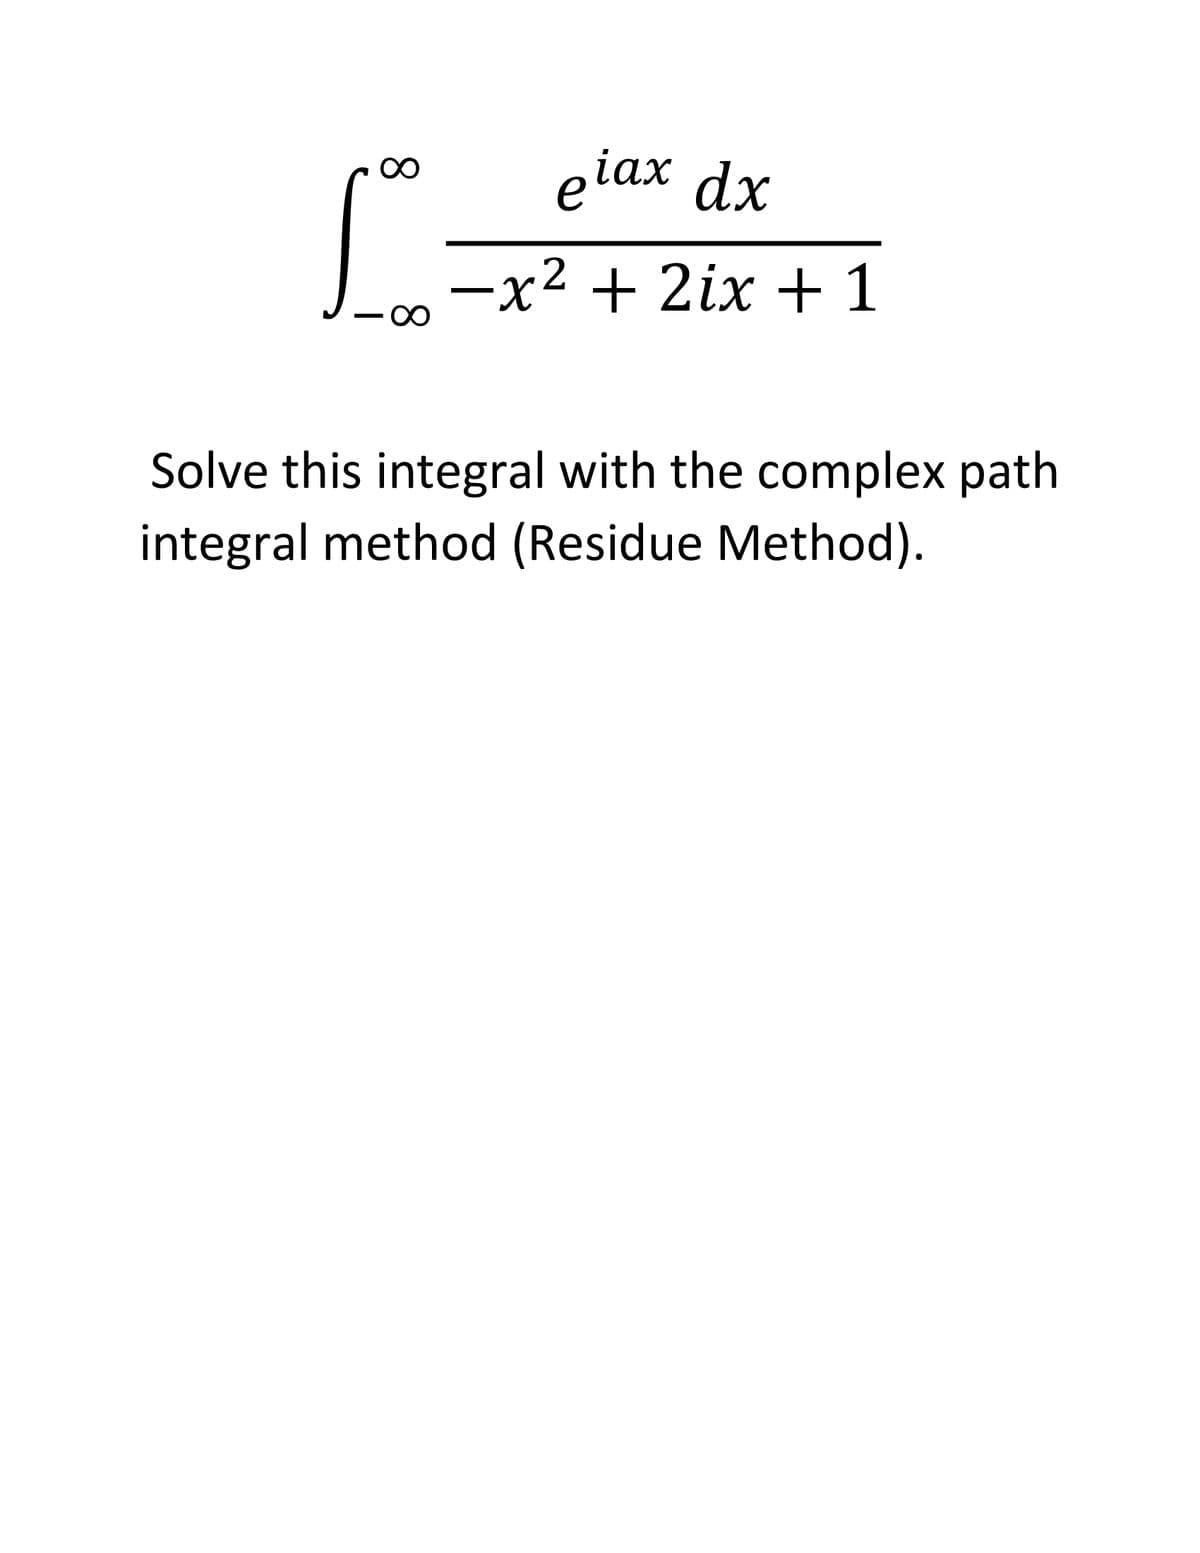 eiаx dx
00
-x2 + 2ix + 1
Solve this integral with the complex path
integral method (Residue Method).
8.
